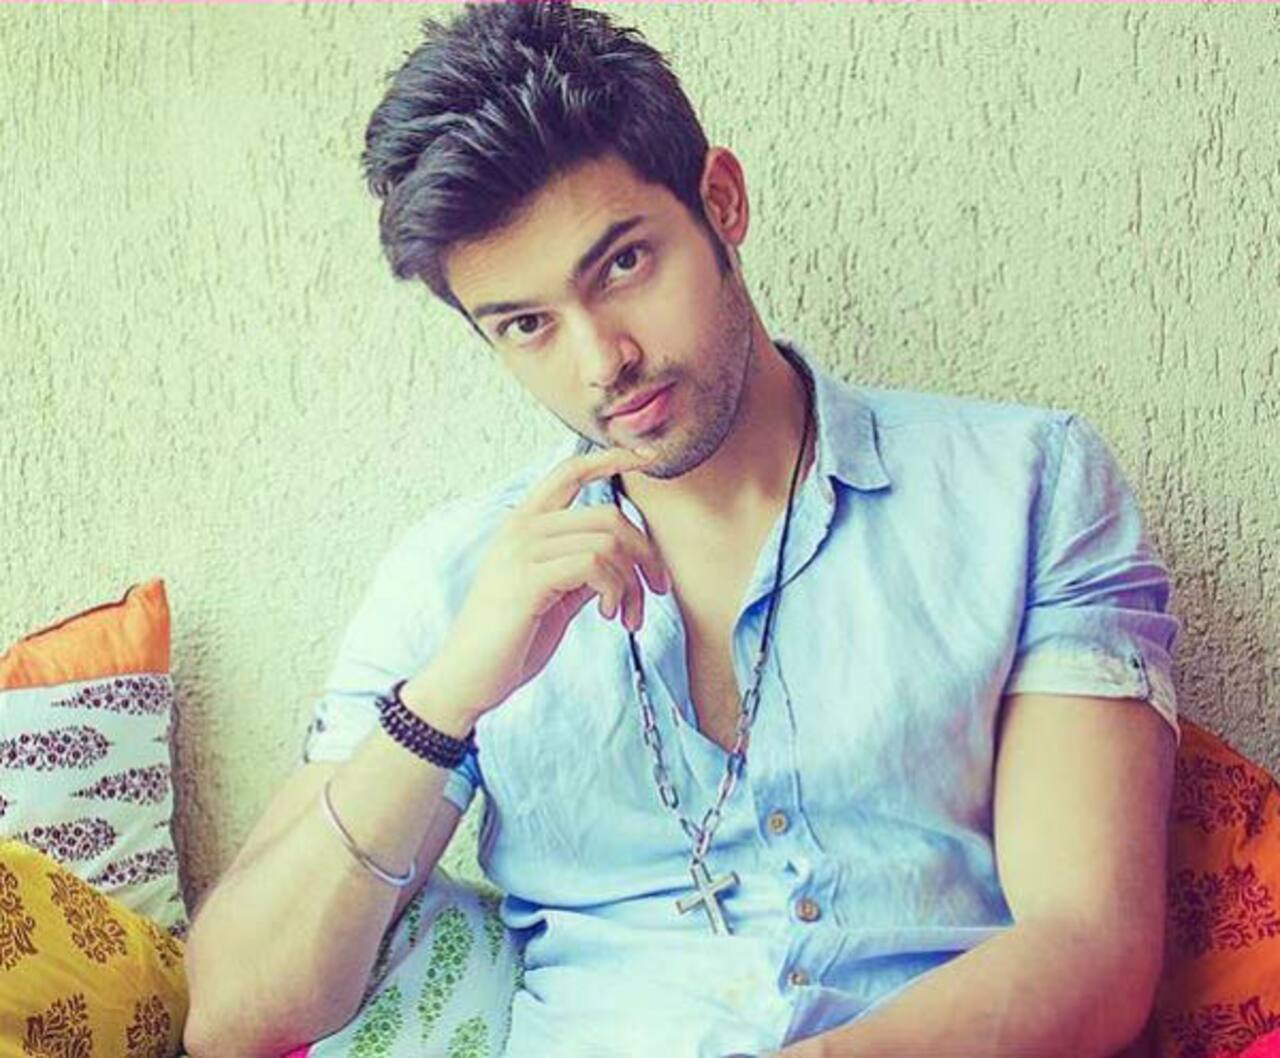 Parth Samthaan's exit from Kaisi Yeh Yaariyan a big SHAM- here's why!